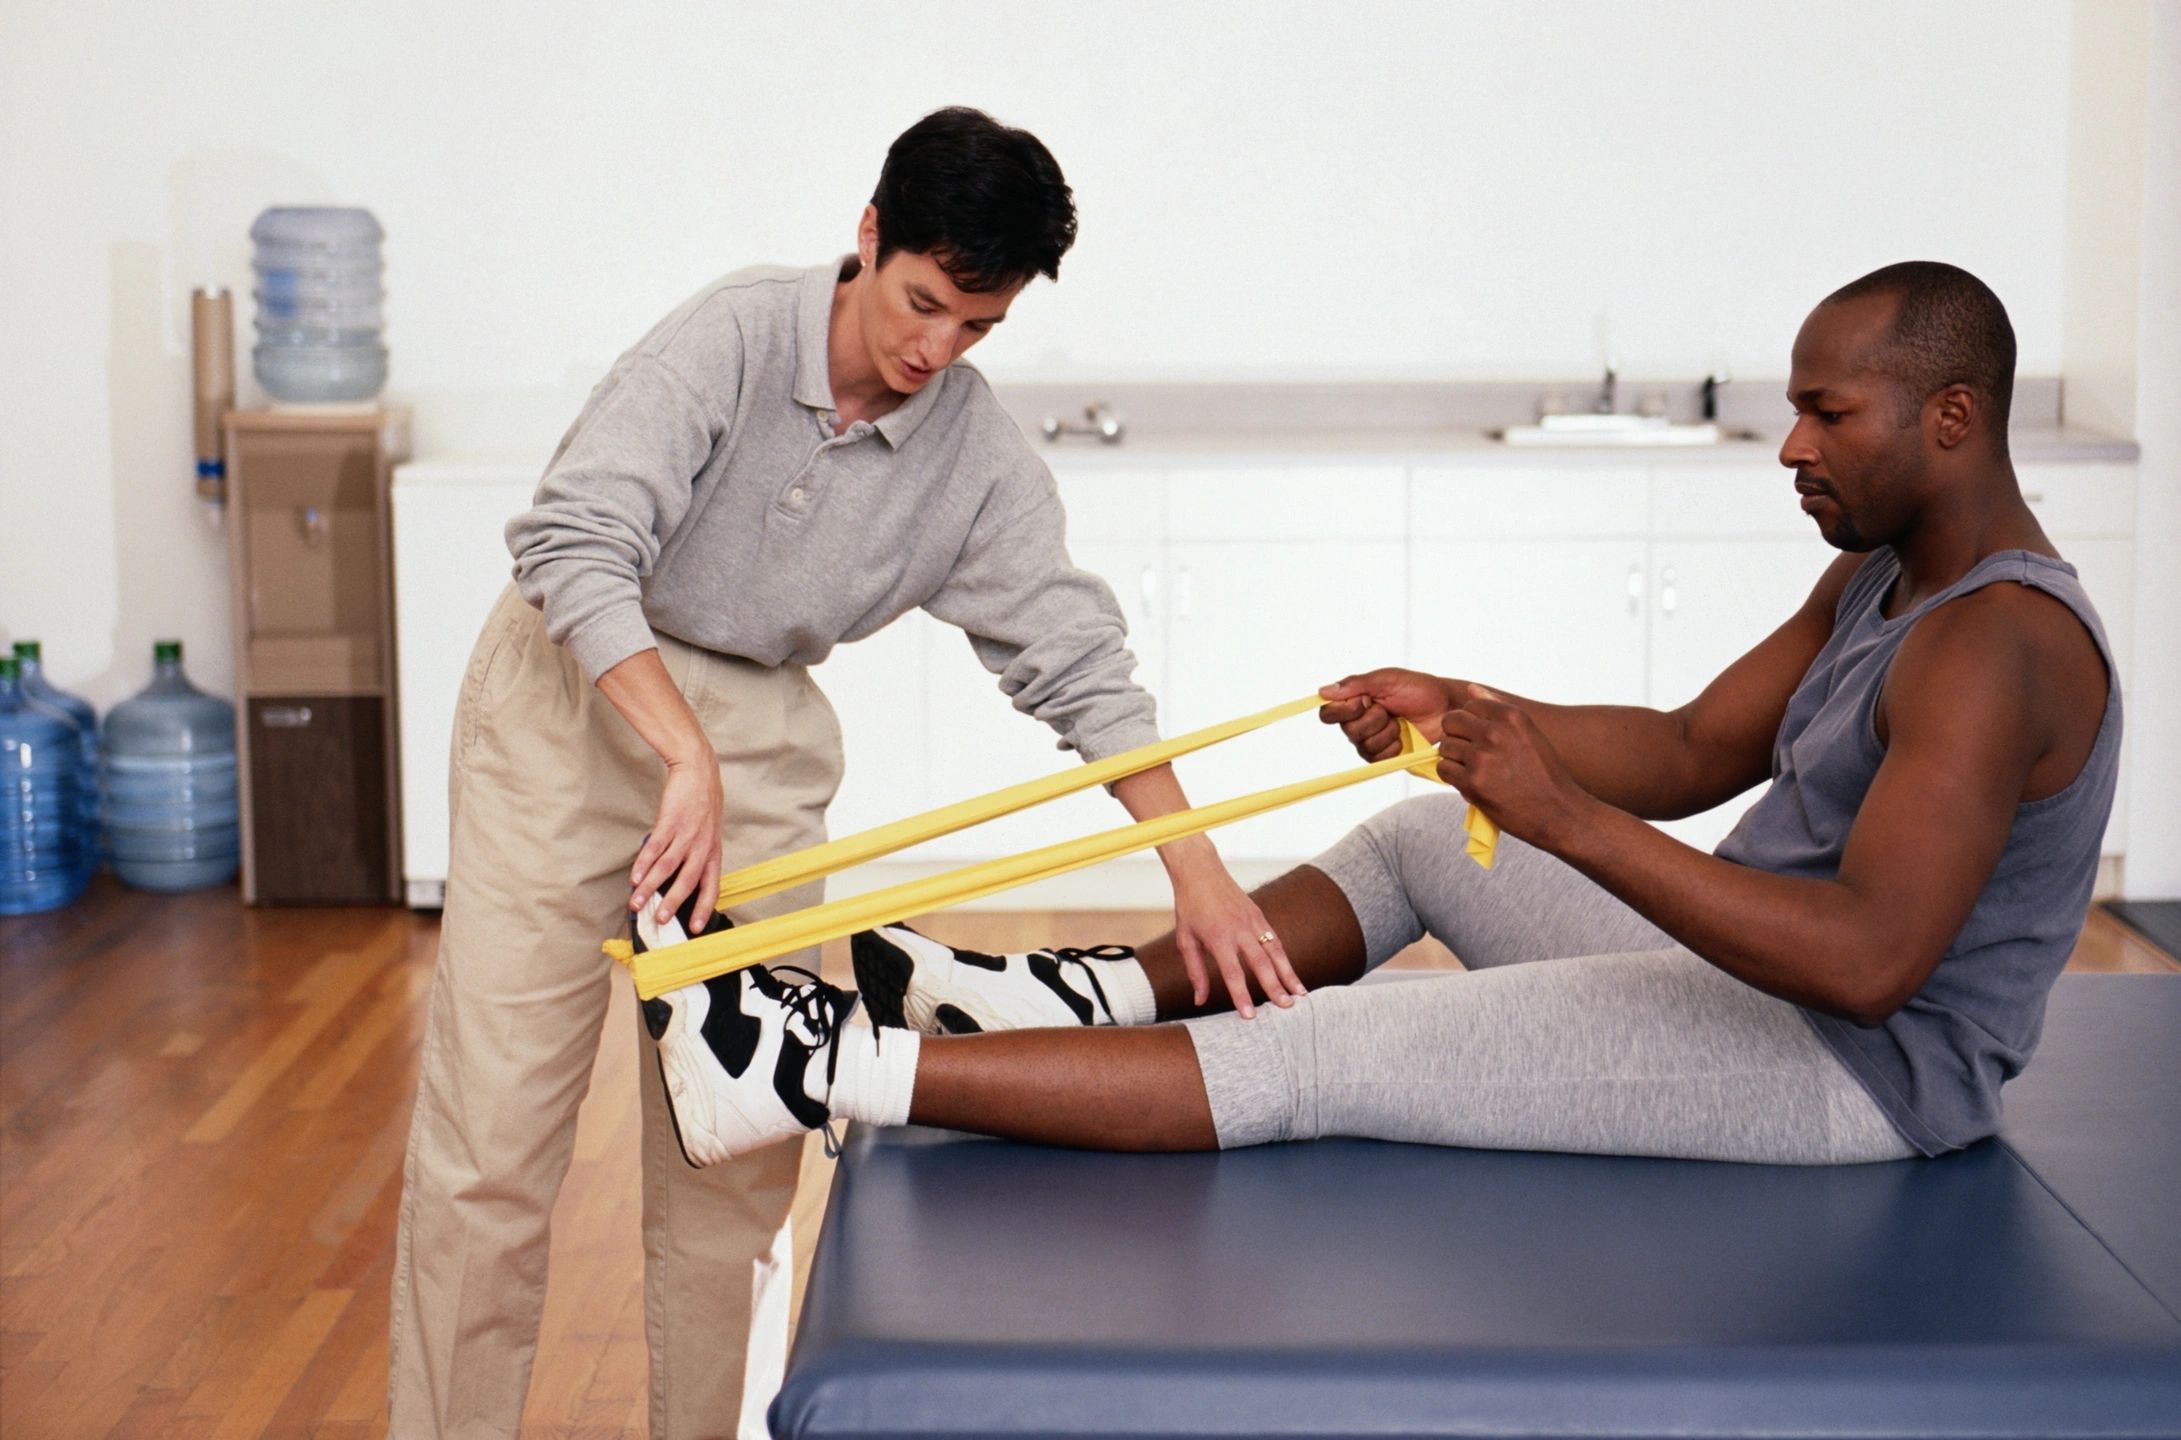 rehab hospital physical therapy